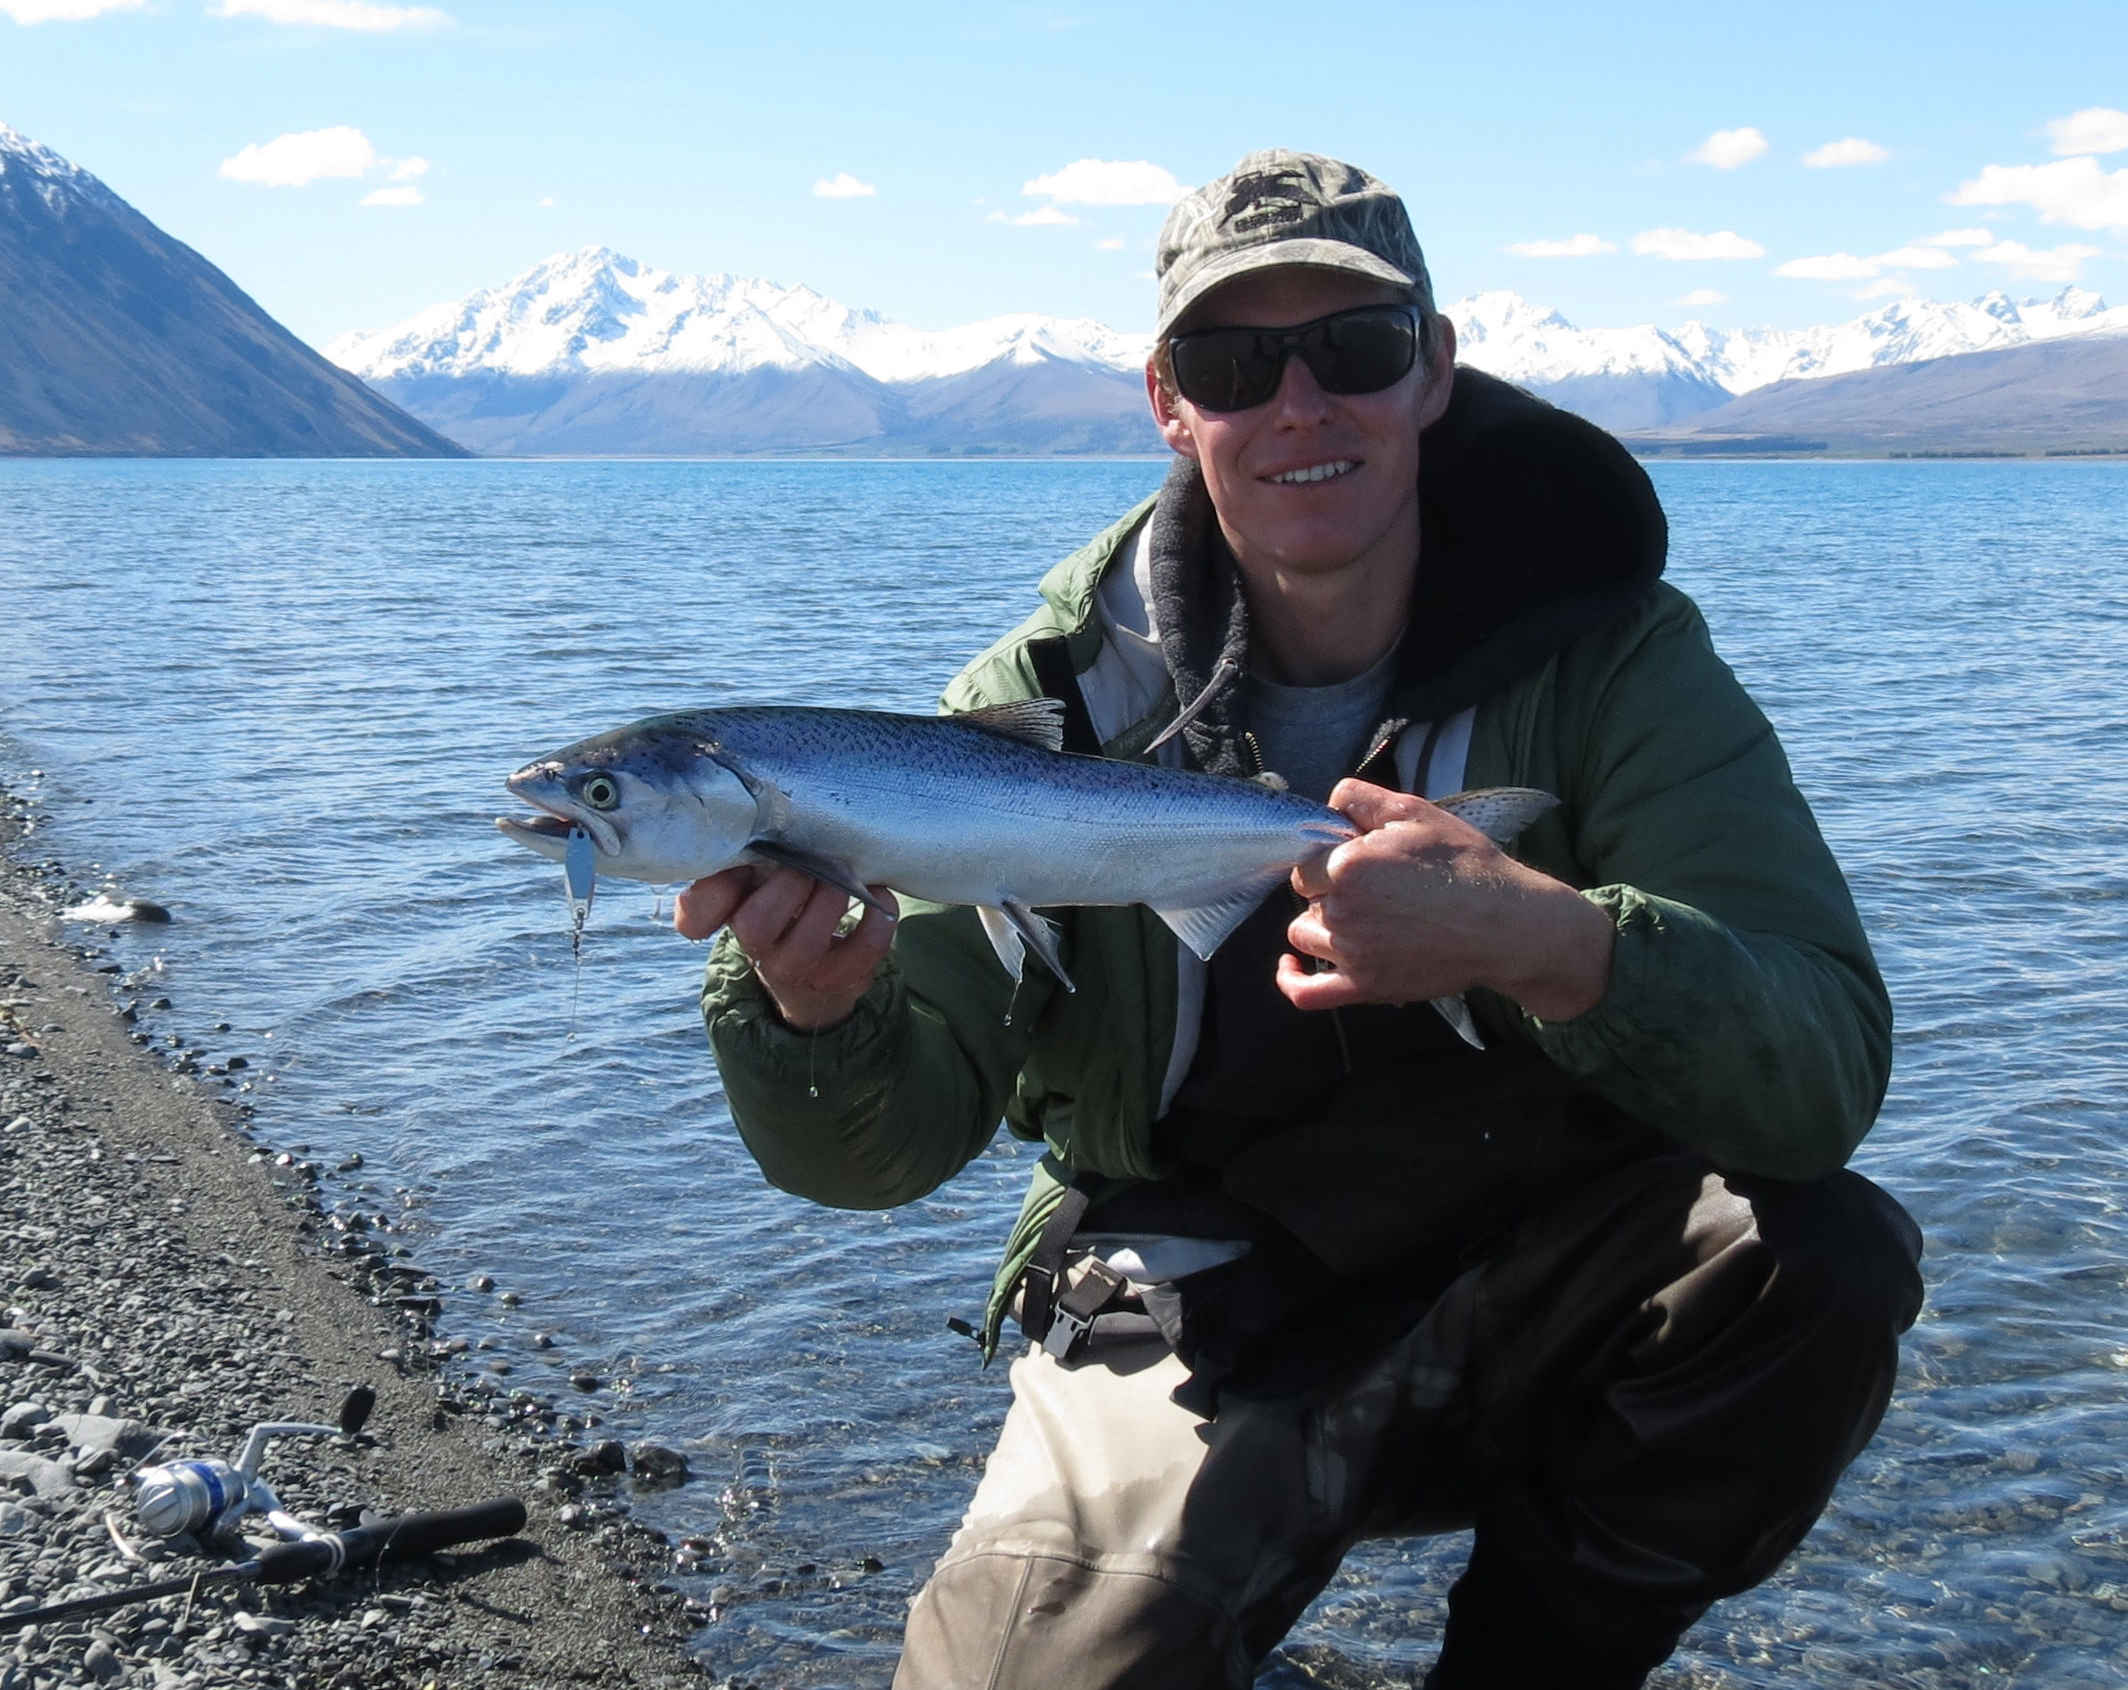 RLCSI3 pencil in the spring and summer of 2020 for some LAke Tekapo salmon fishing